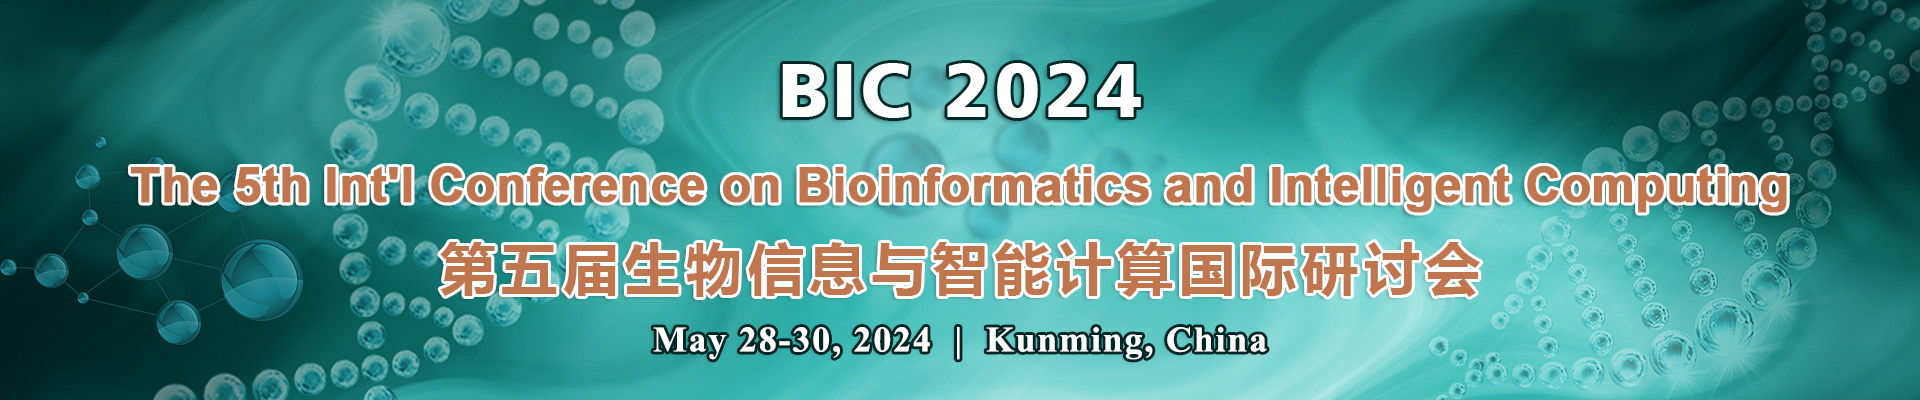 The 5th Int'l Conference on Bioinformatics and Intelligent Computing (BIC 2024), Kunming, Yunnan, China